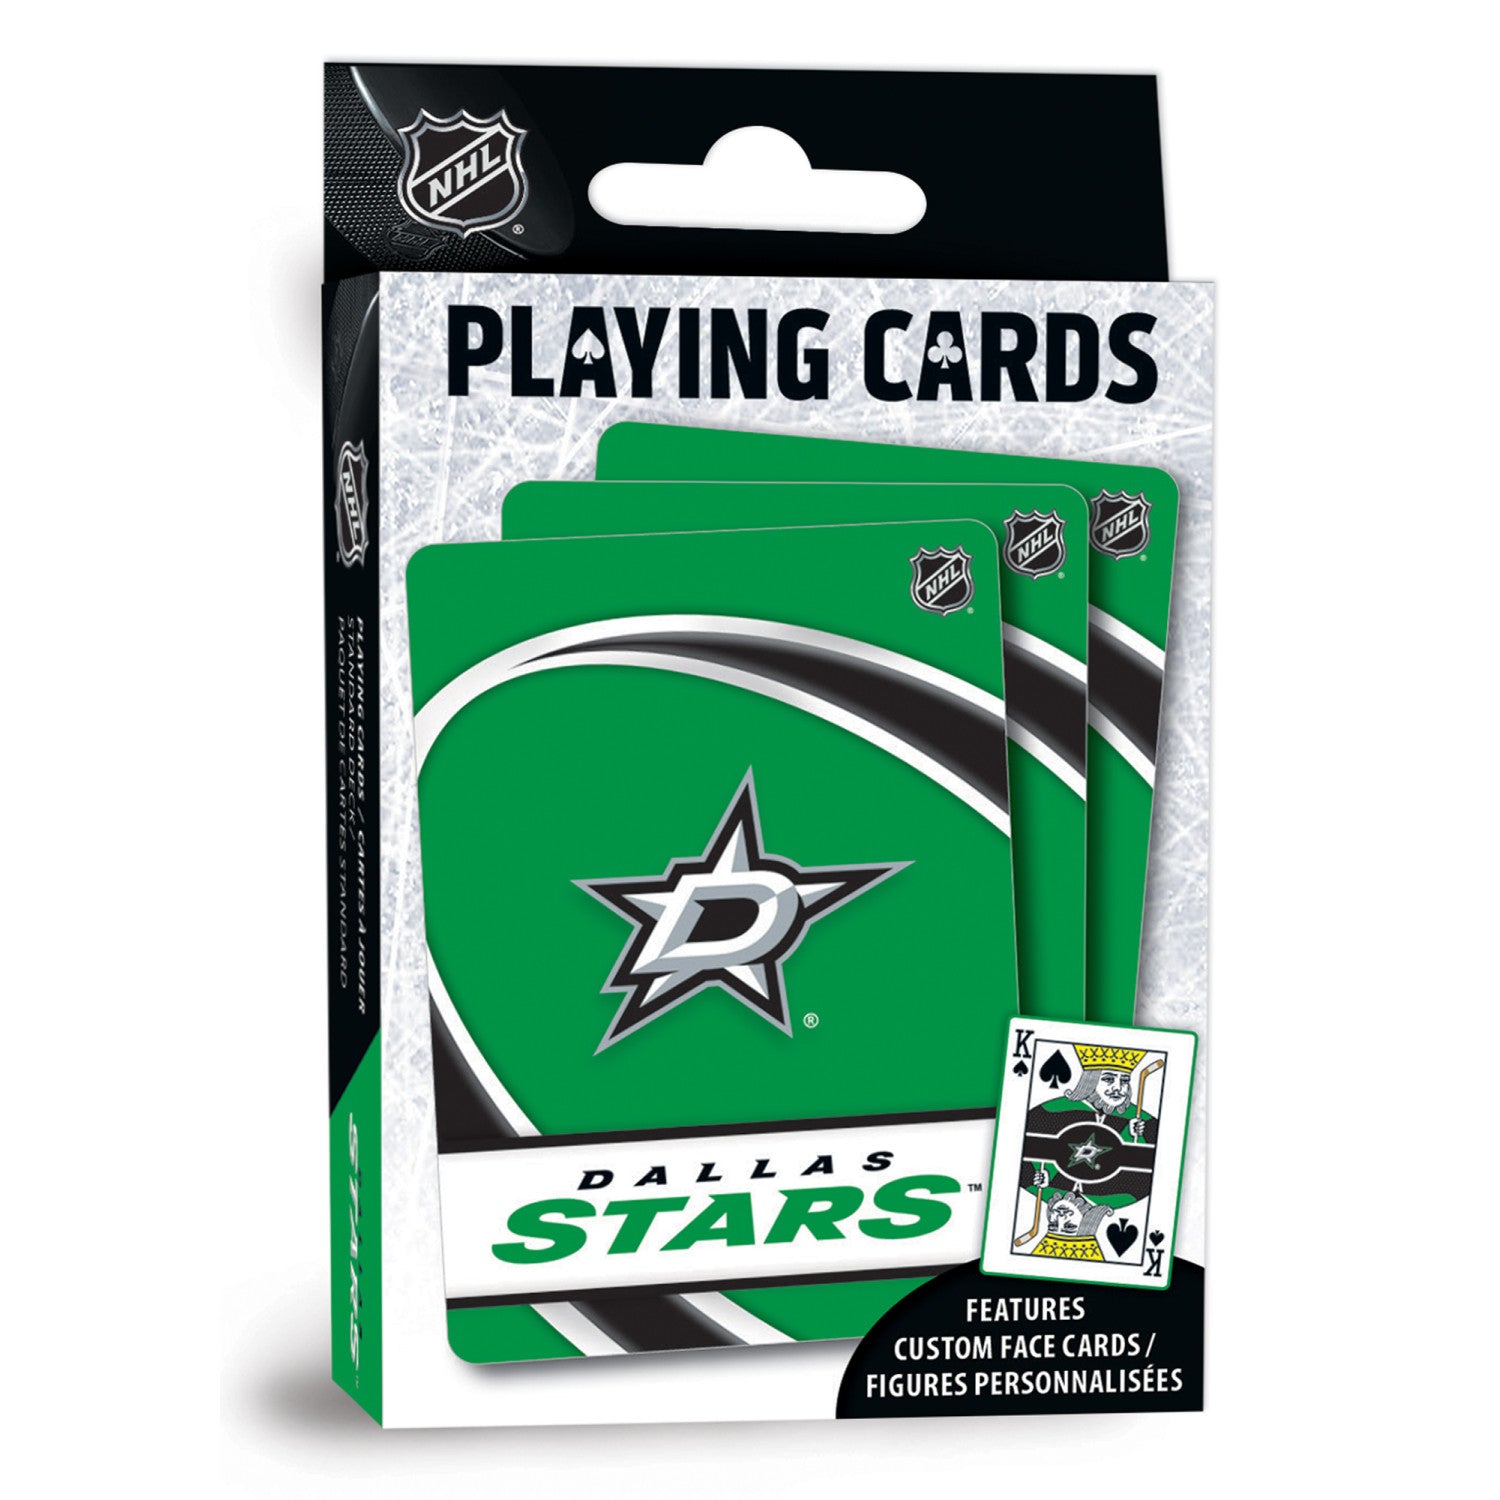 Dallas Stars Playing Cards - 54 Card Deck